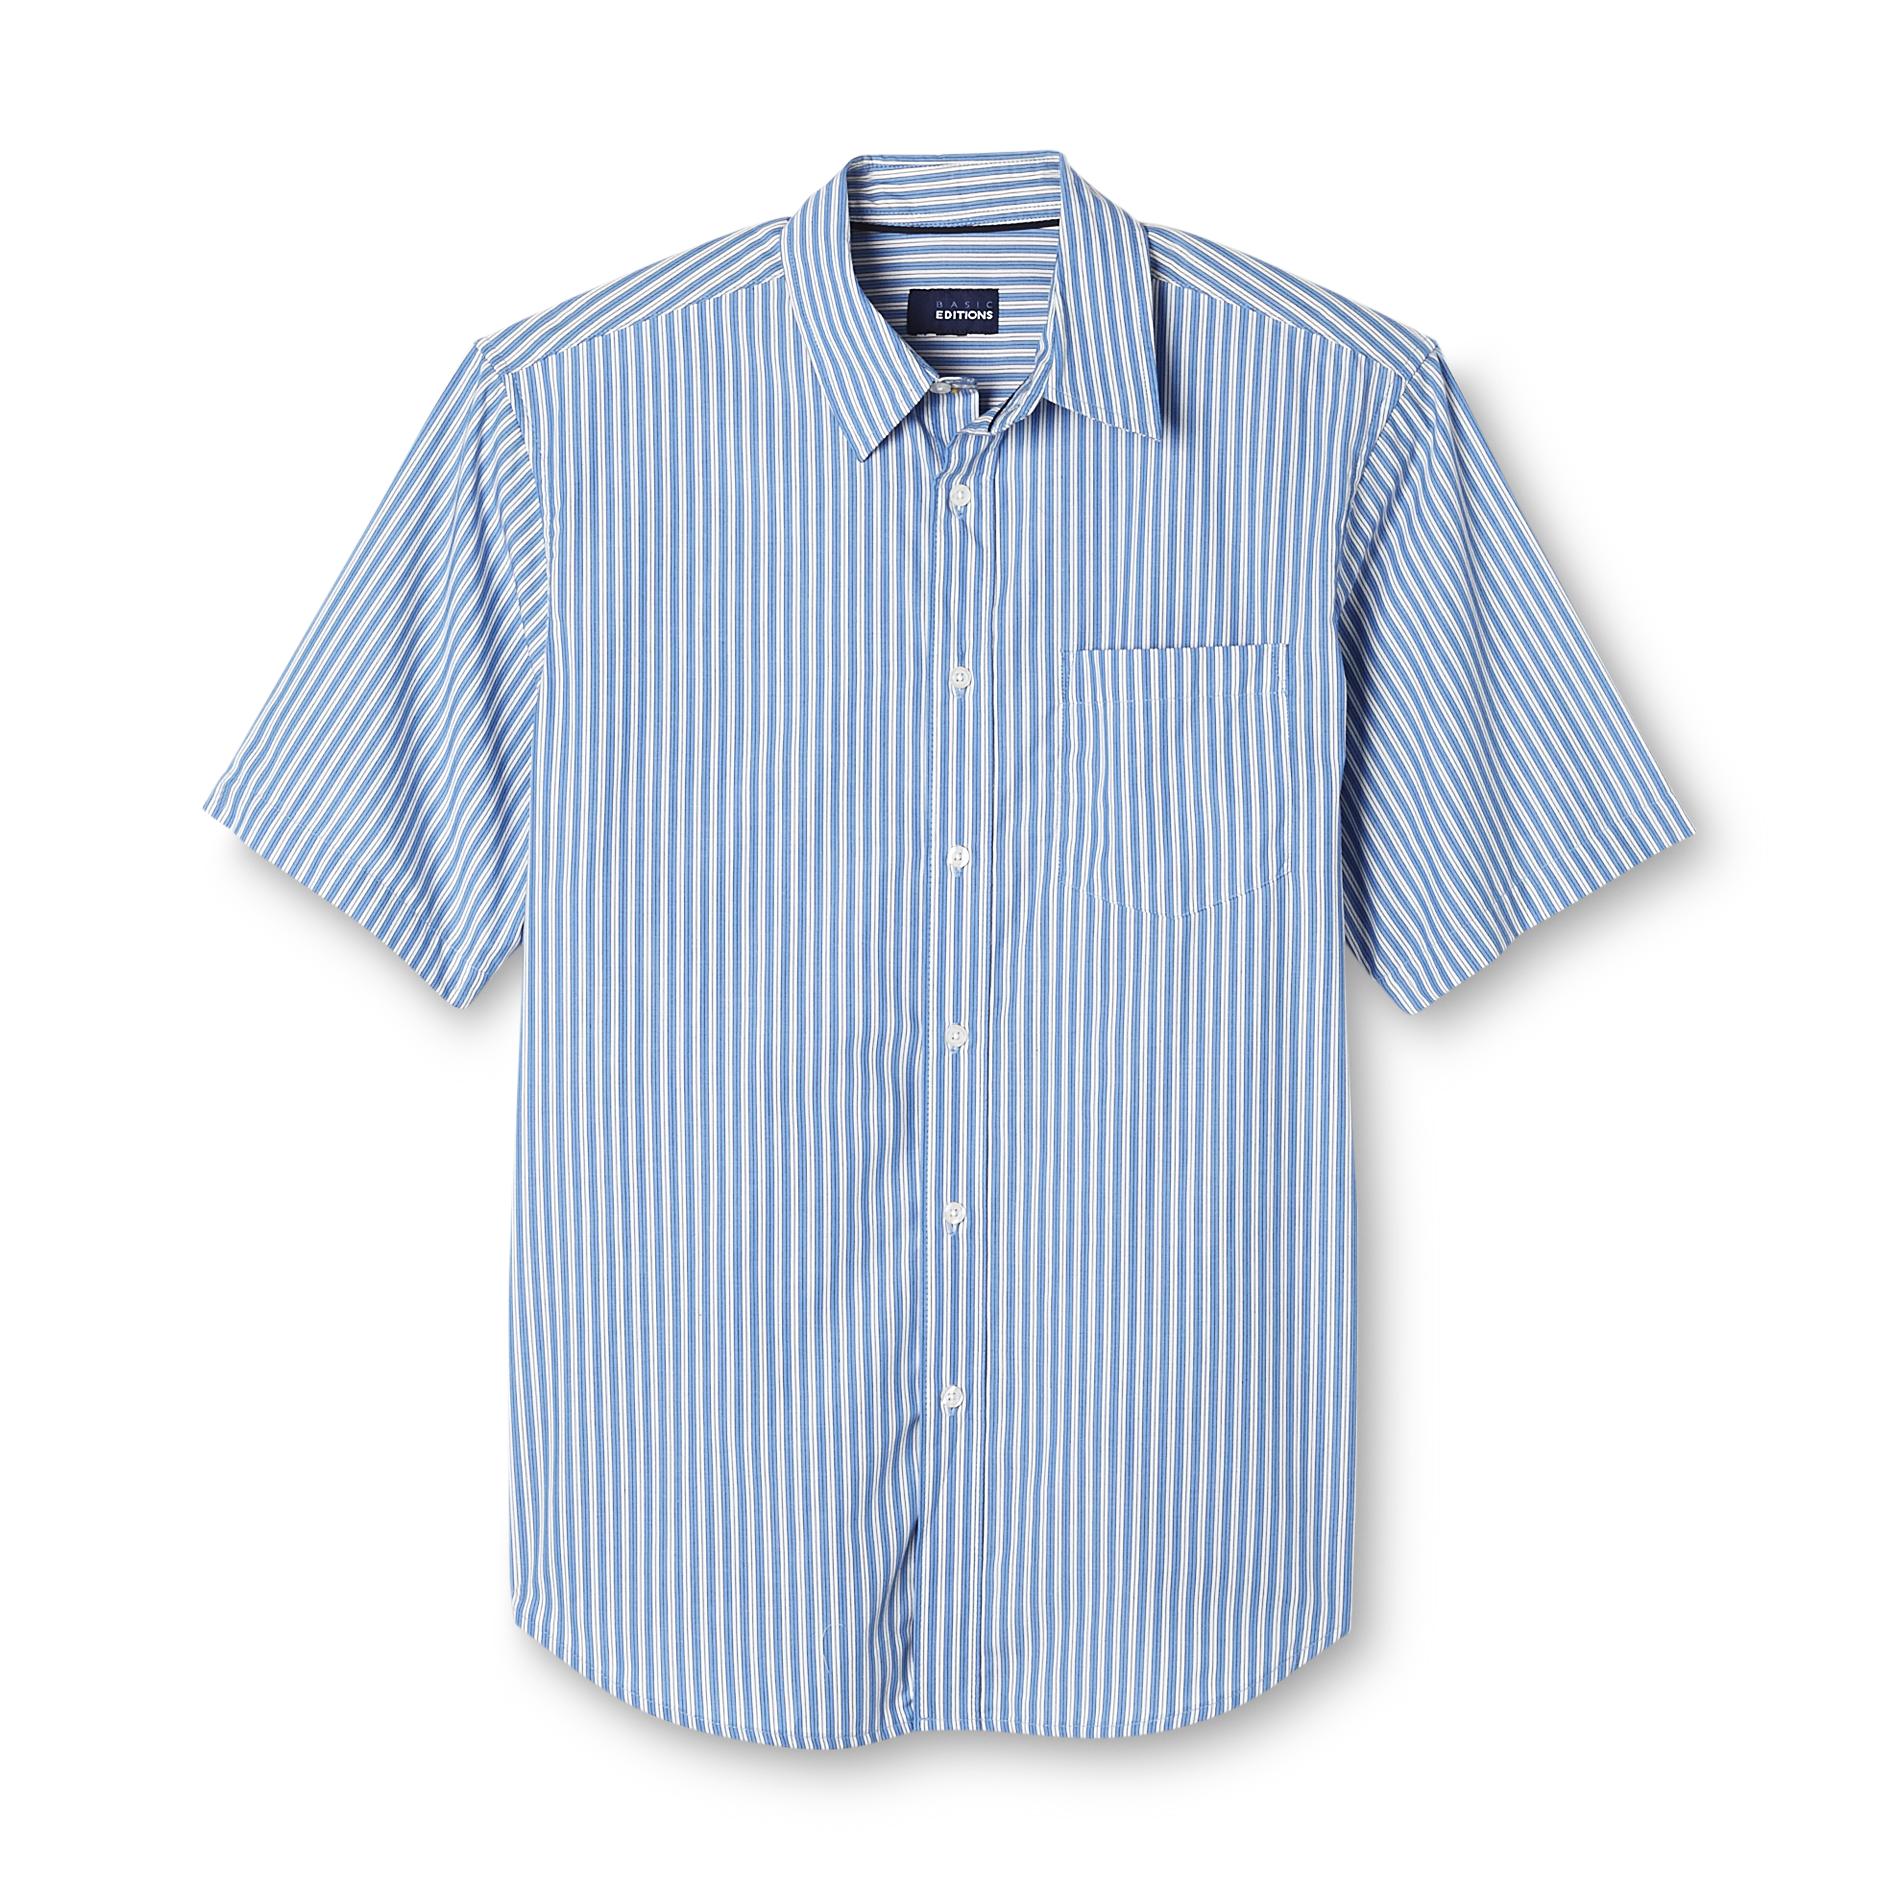 Basic Editions Men's Big & Tall Easy Care Woven Shirt - Striped